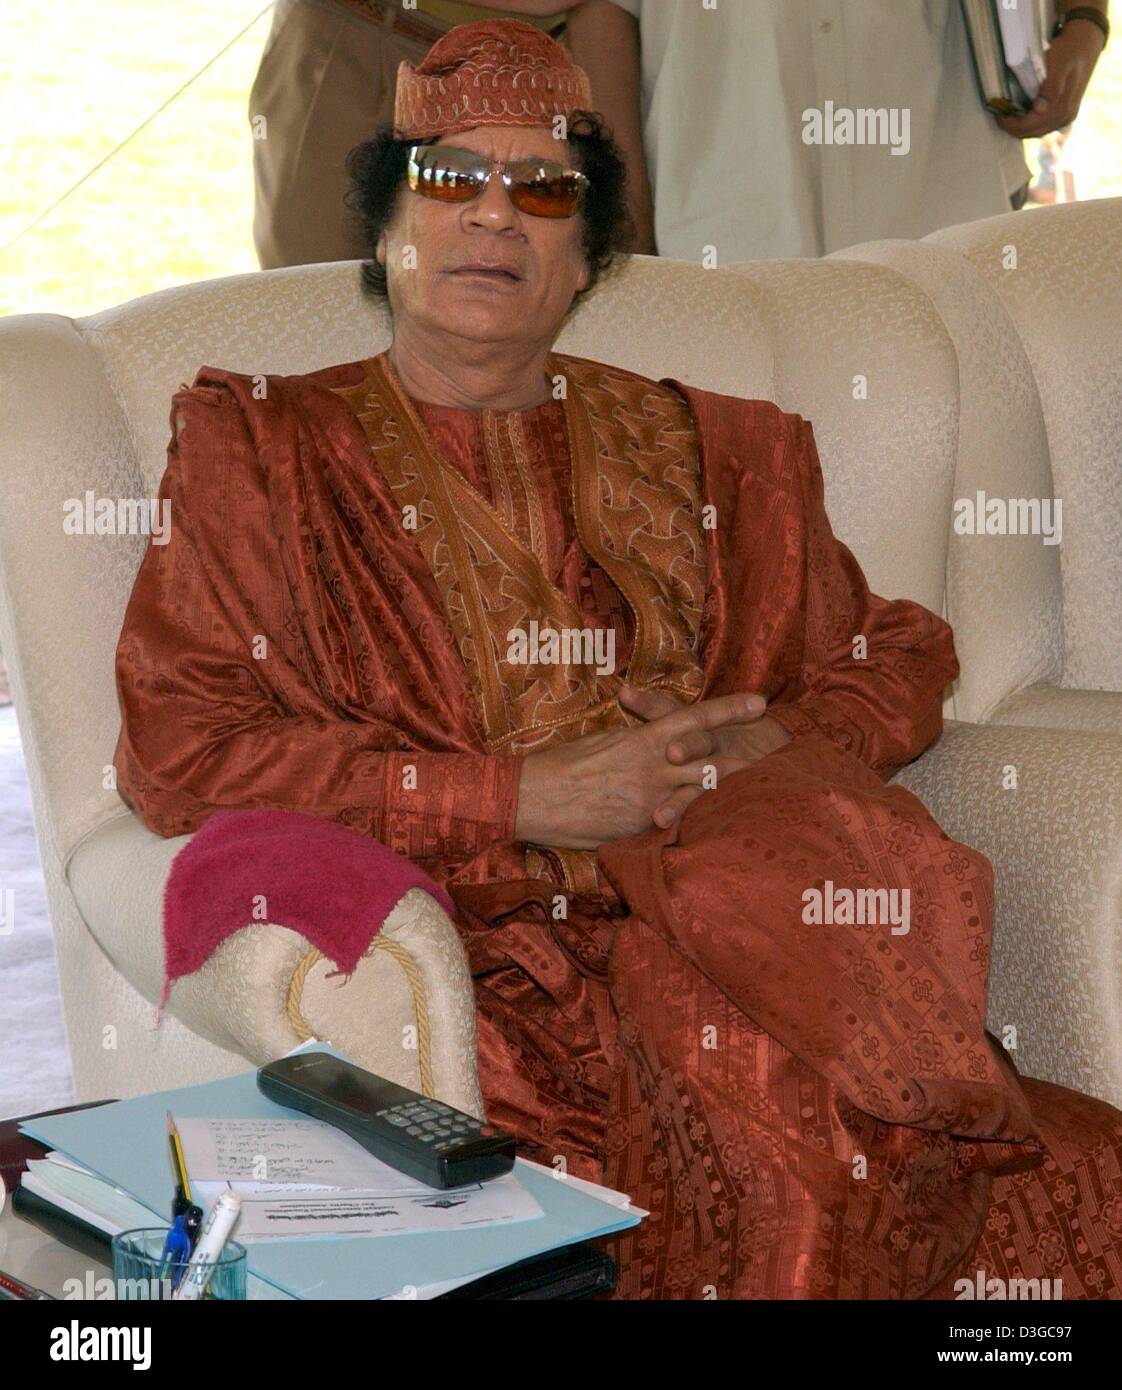 (dpa) - Libyan leader Colonel Muammar Gaddafi pictured in Tripoli, Libya, 15 October 2004. Gaddafi has been in power for thirty years when he led a military coup that toppled King Idris and ended the monarchy in Libya. Stock Photo